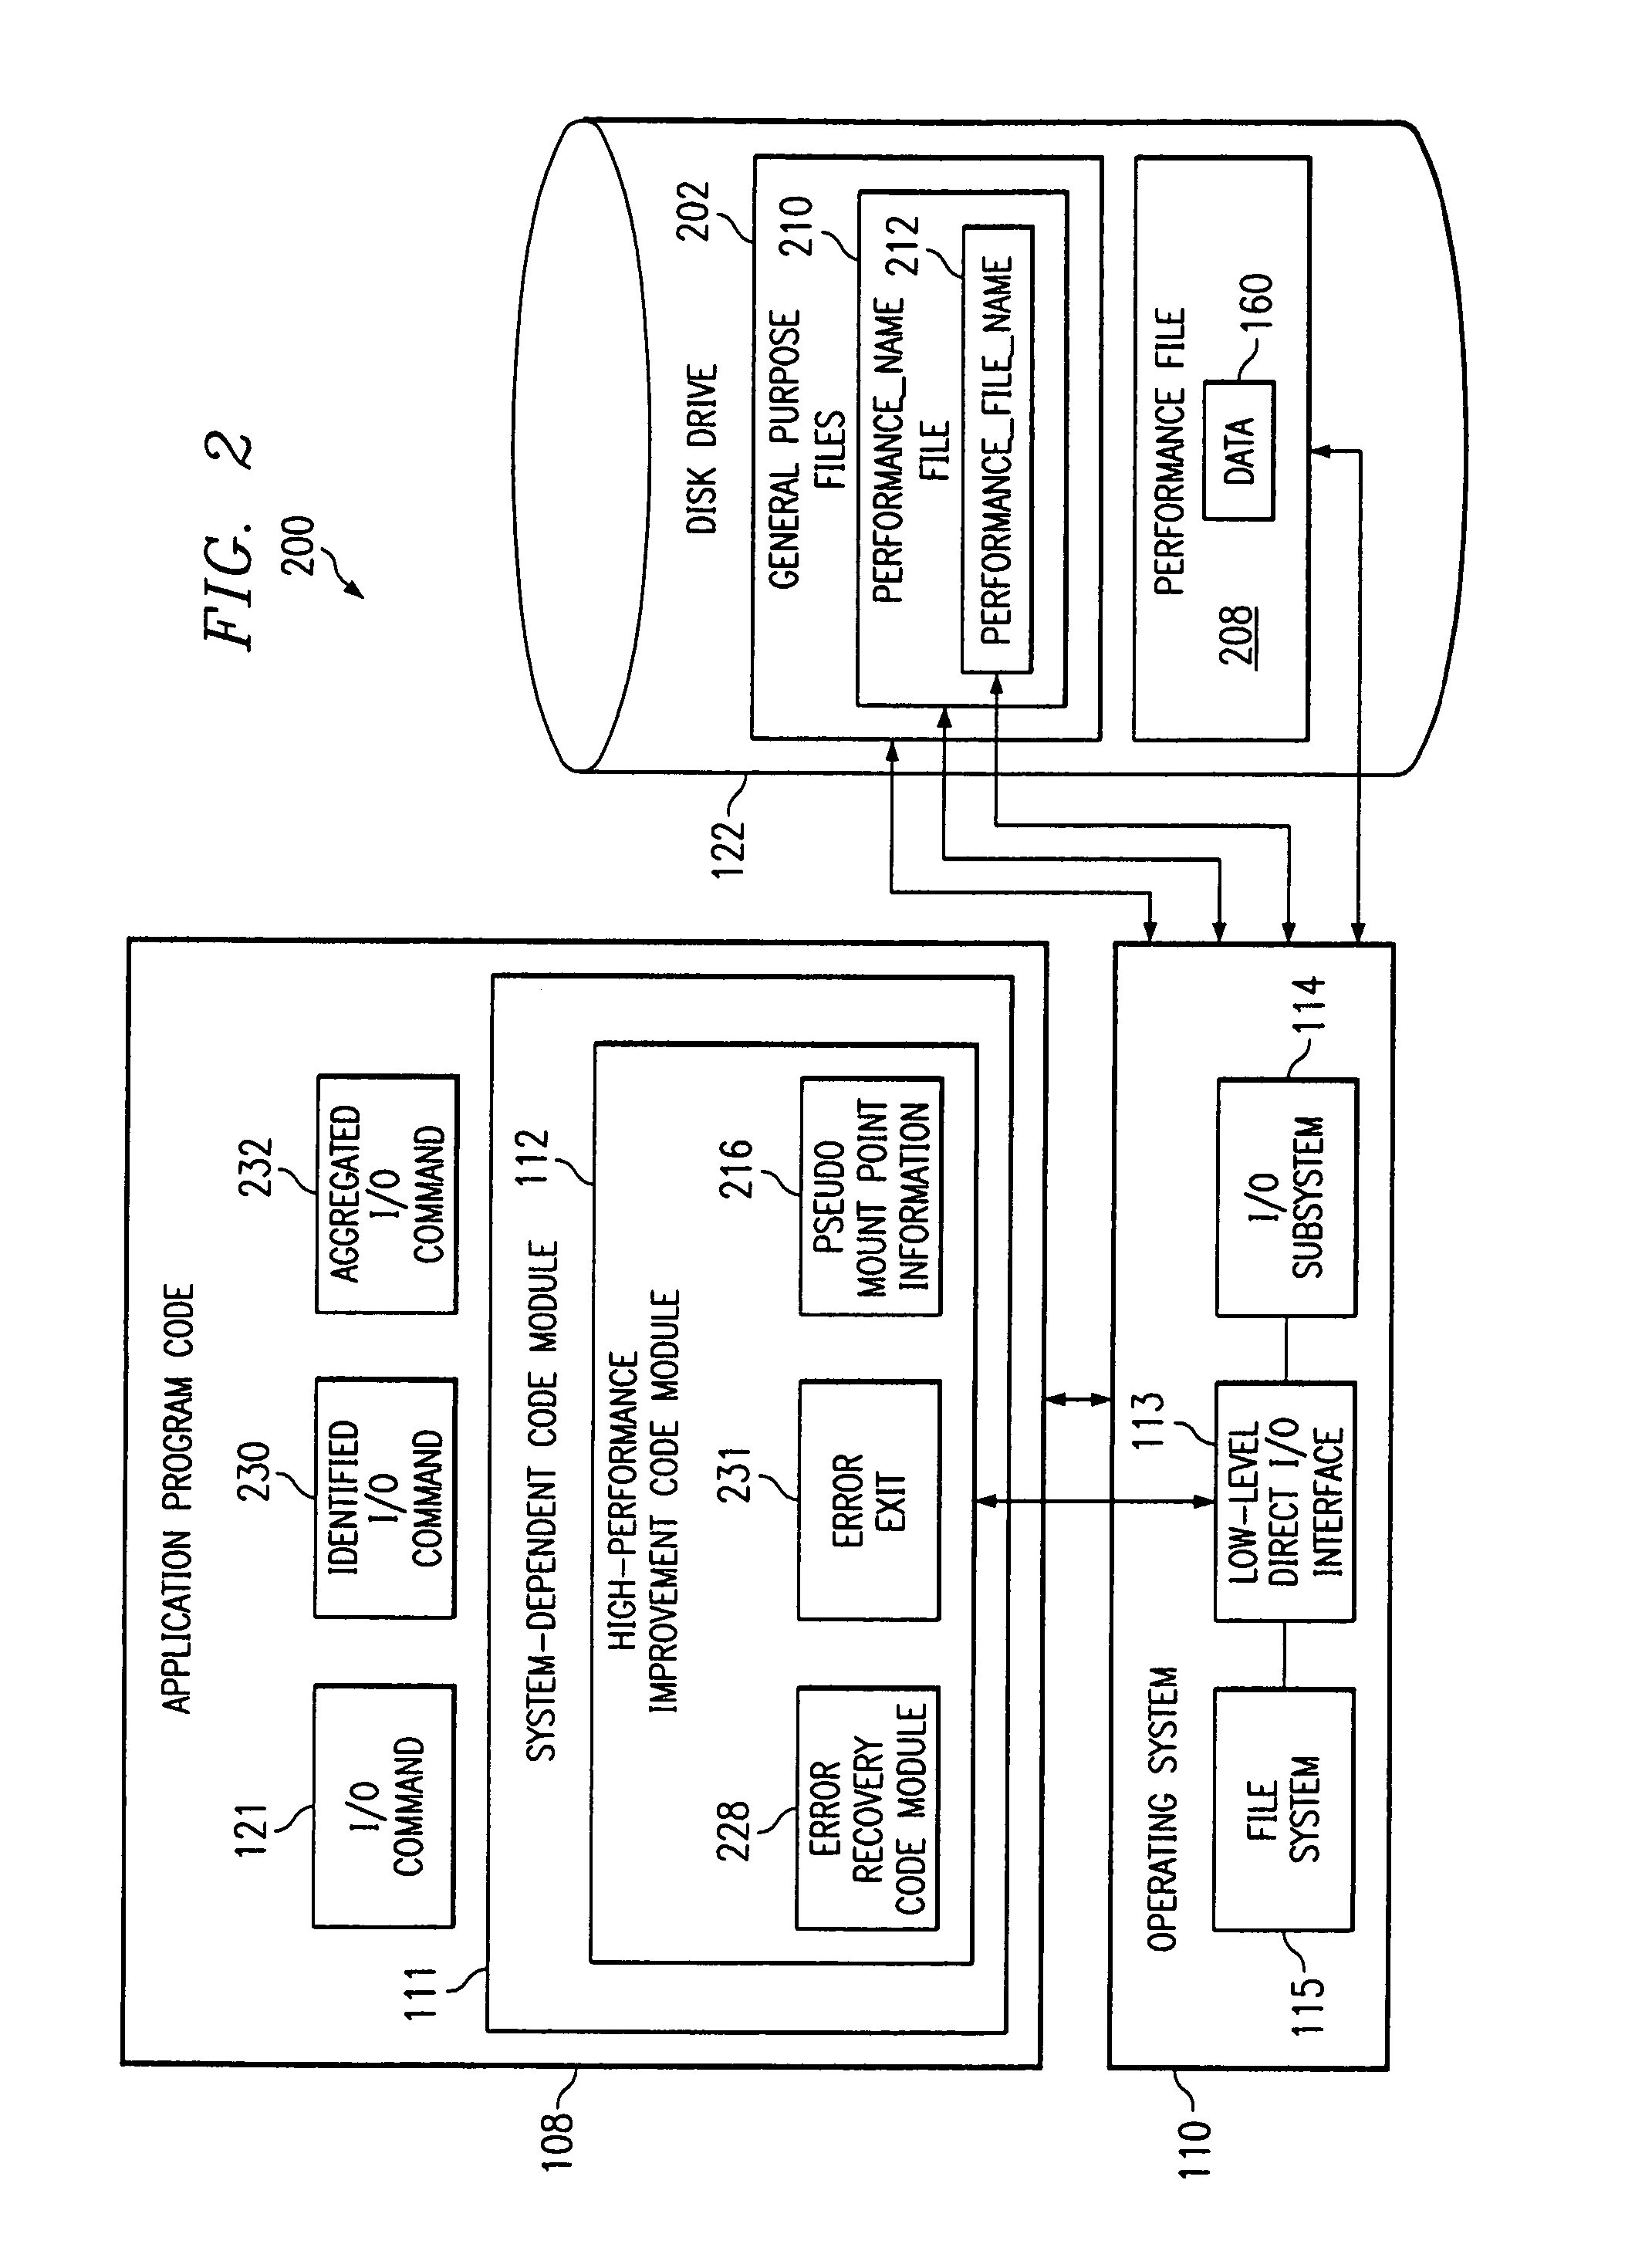 Bypassing disk I/O operations when porting a computer application from one operating system to a different operating system